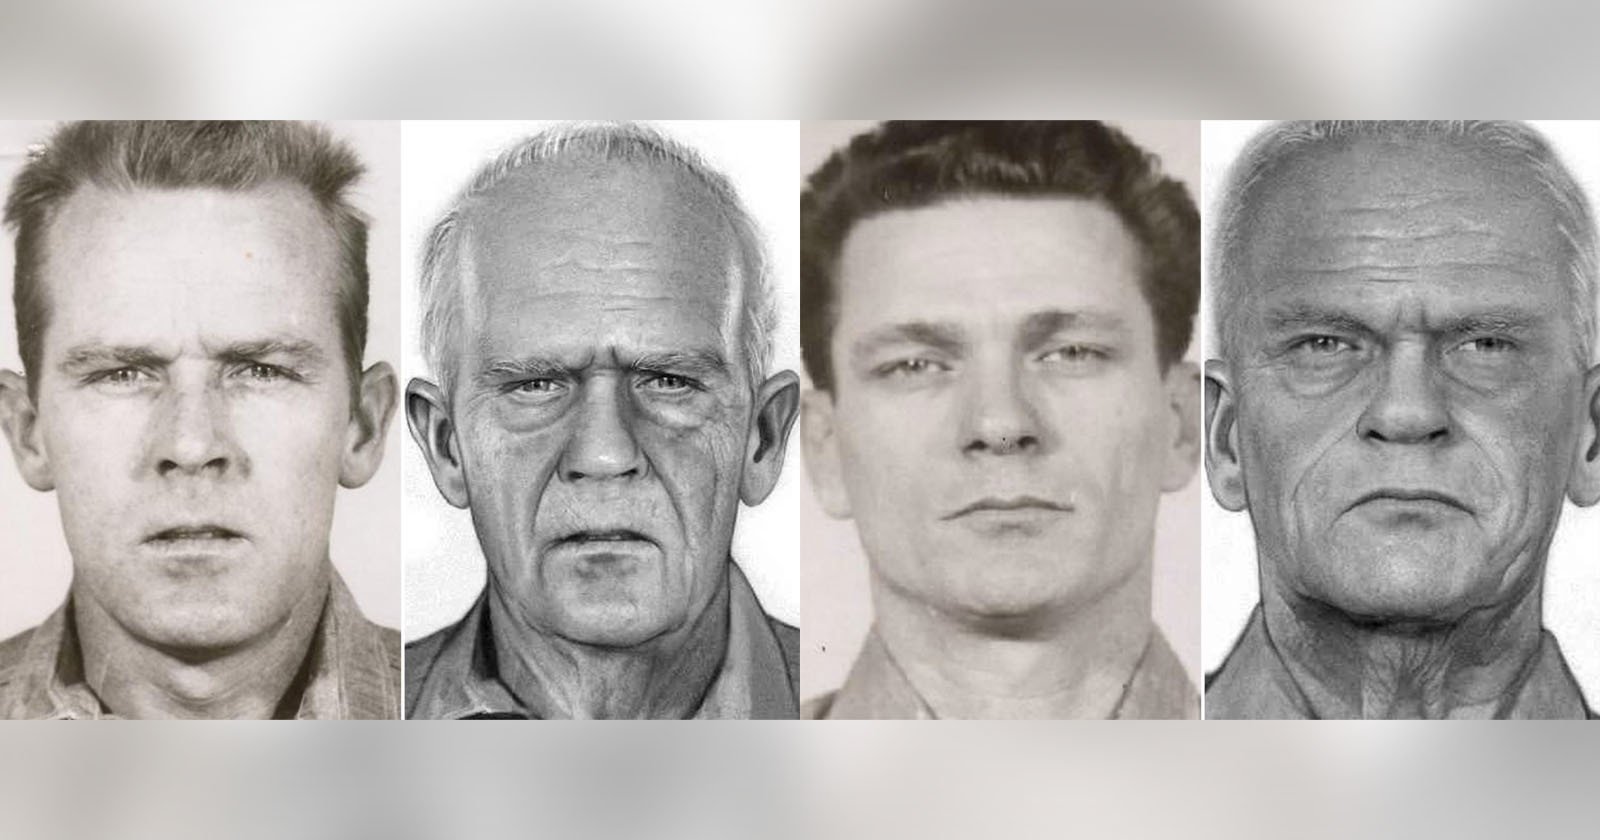 The original images and age-processed images of the Alcatraz escapees